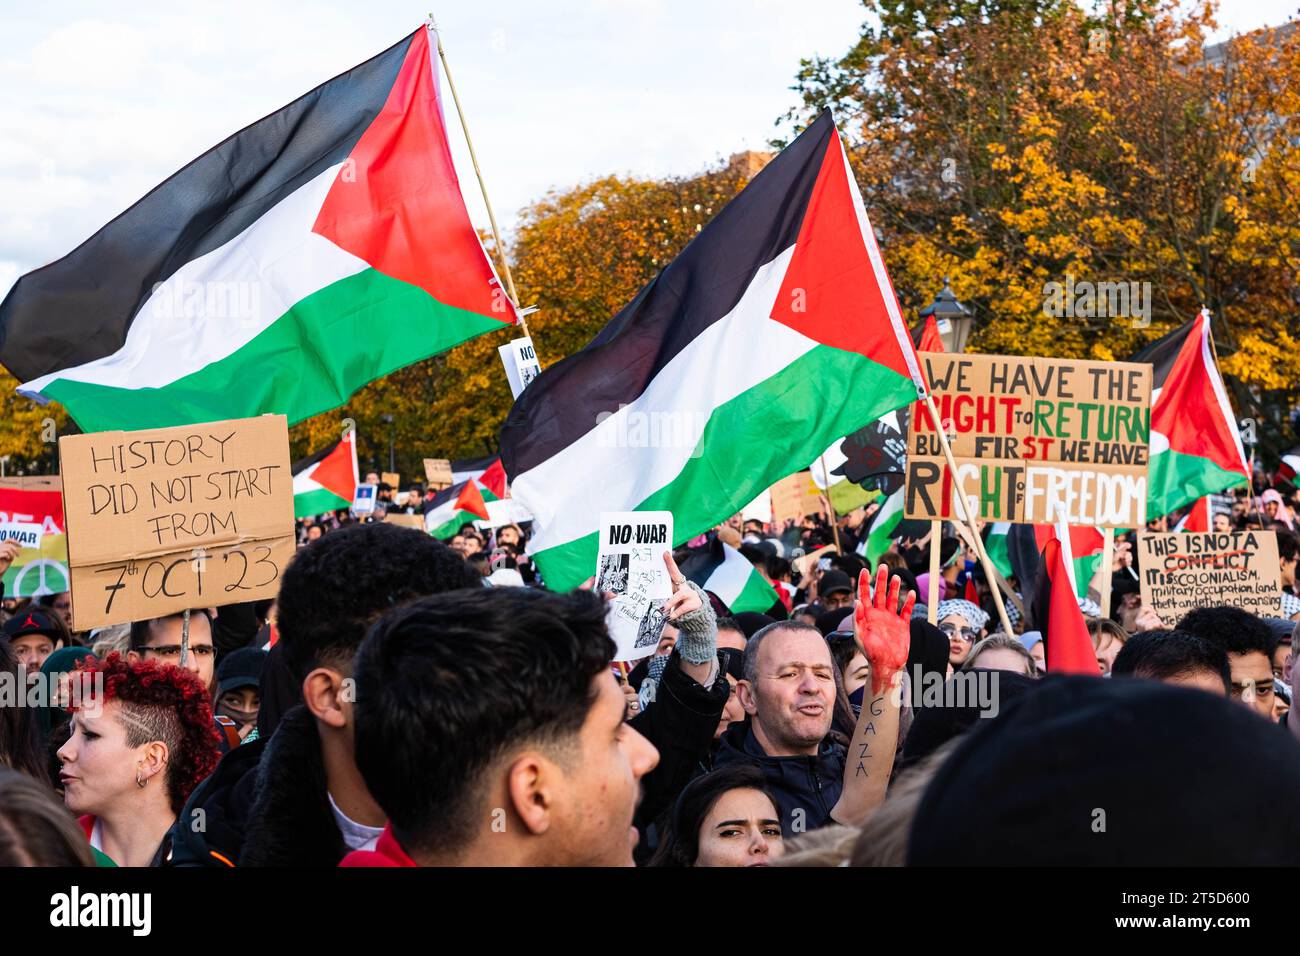 Berlin, Germany - November, 4: People with palestinian flags and sign on Free Palestine Demonstration in Berlin Stock Photo